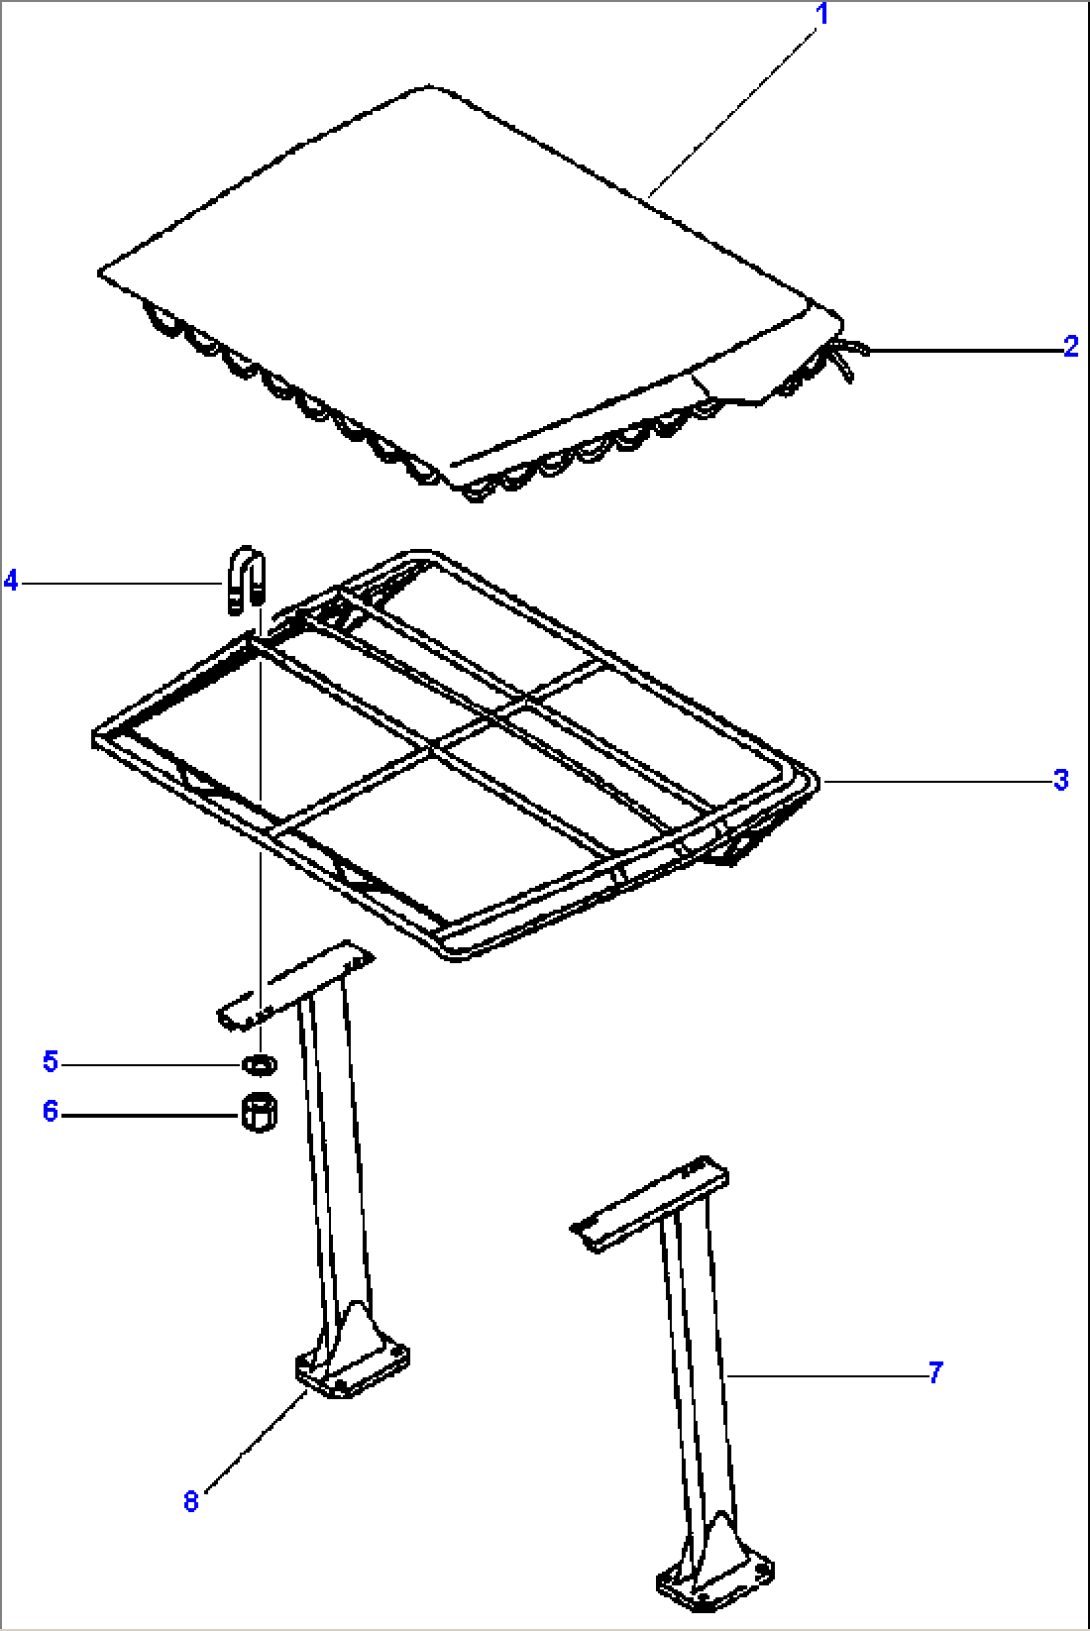 CANVAS CANOPY